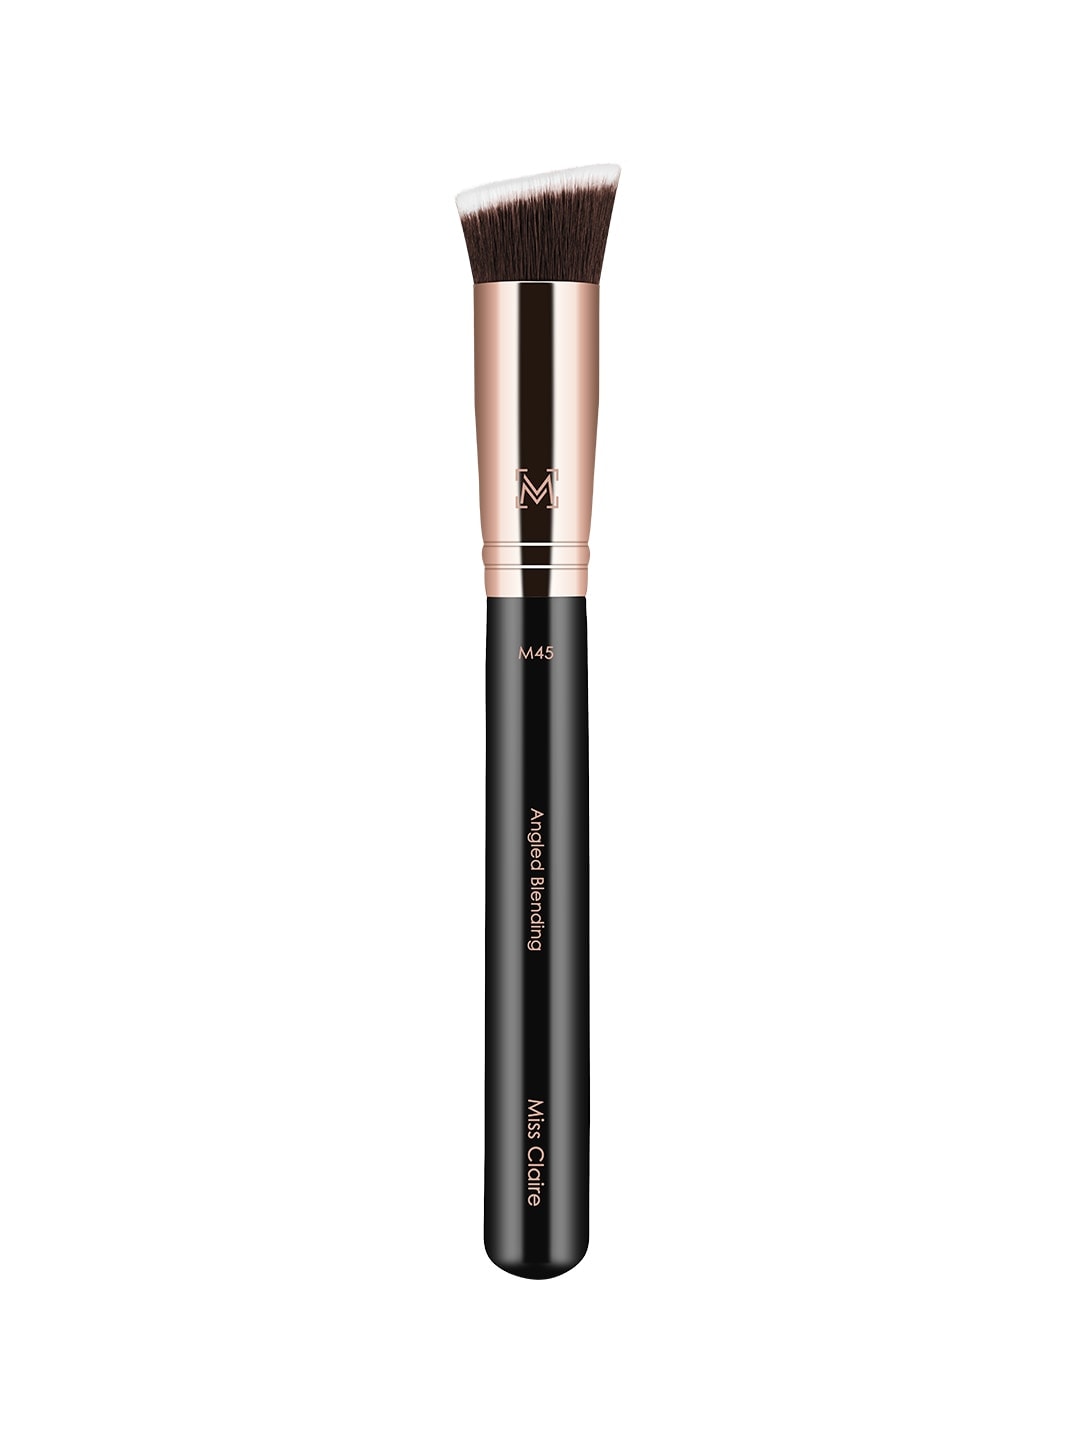 Miss Claire Angled Blending Brush - M45 Black & Rose Gold-Toned Price in India